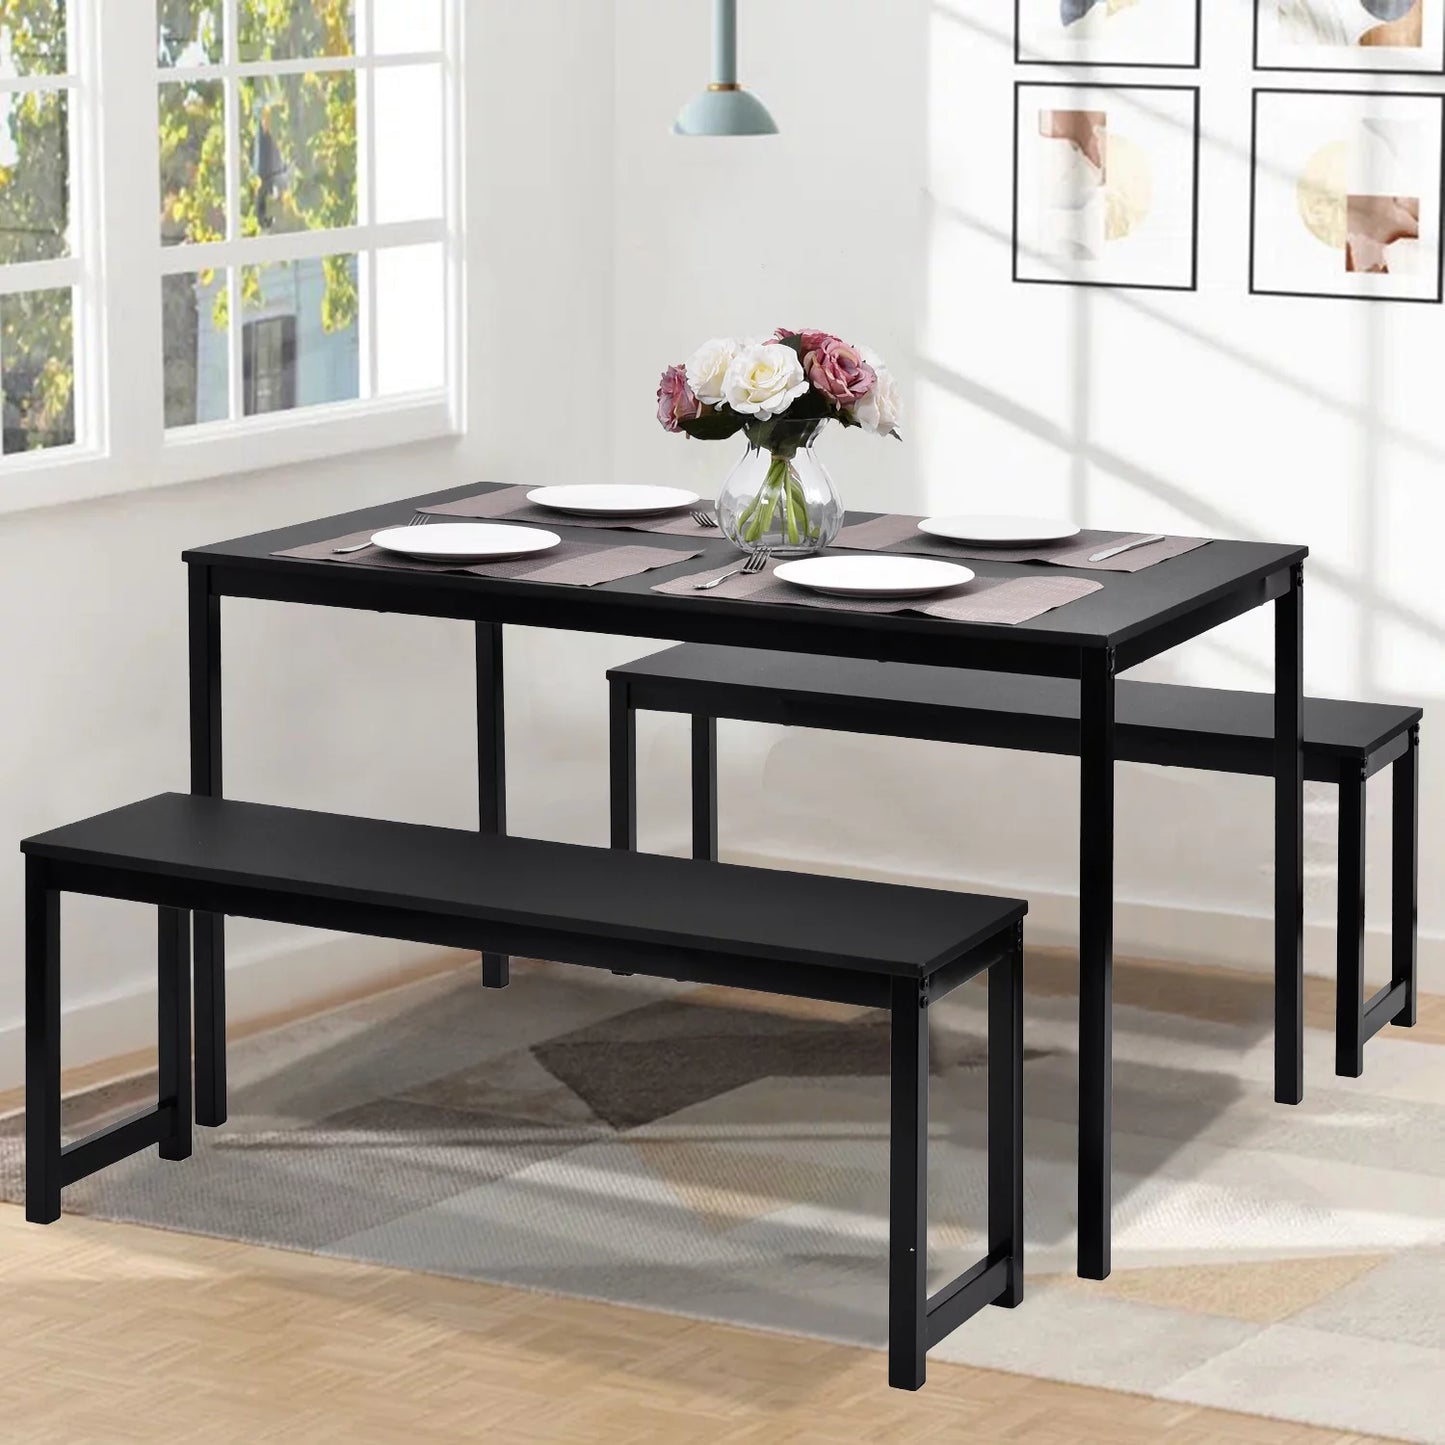 3 Piece Dining Table Set, Modern Wood Table Top Dining Table Set with Bench and Metal Frame, Breakfast Nook Dining Room Set, Dining Set for 4, Kitchen Living Dining Room Furniture, Black